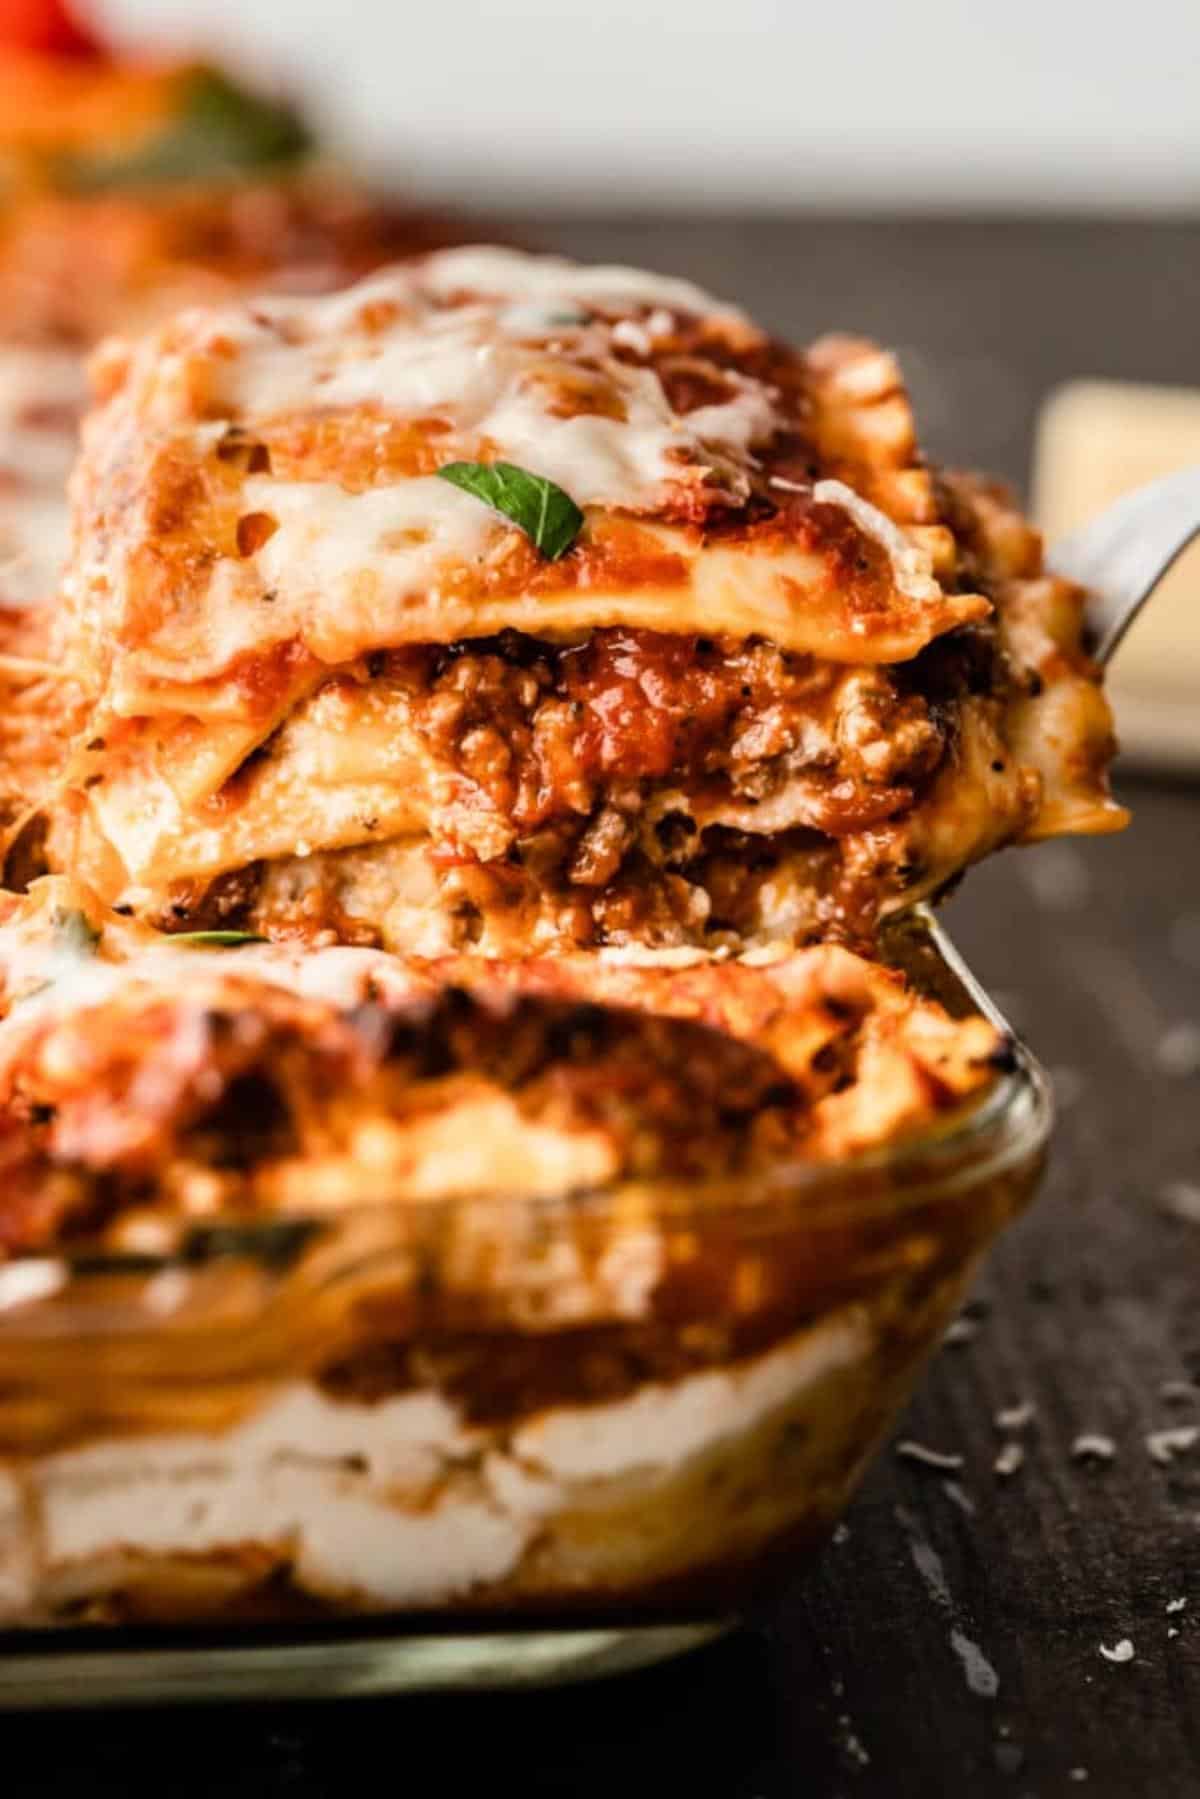 A lasagna being taken out of a baking dish.